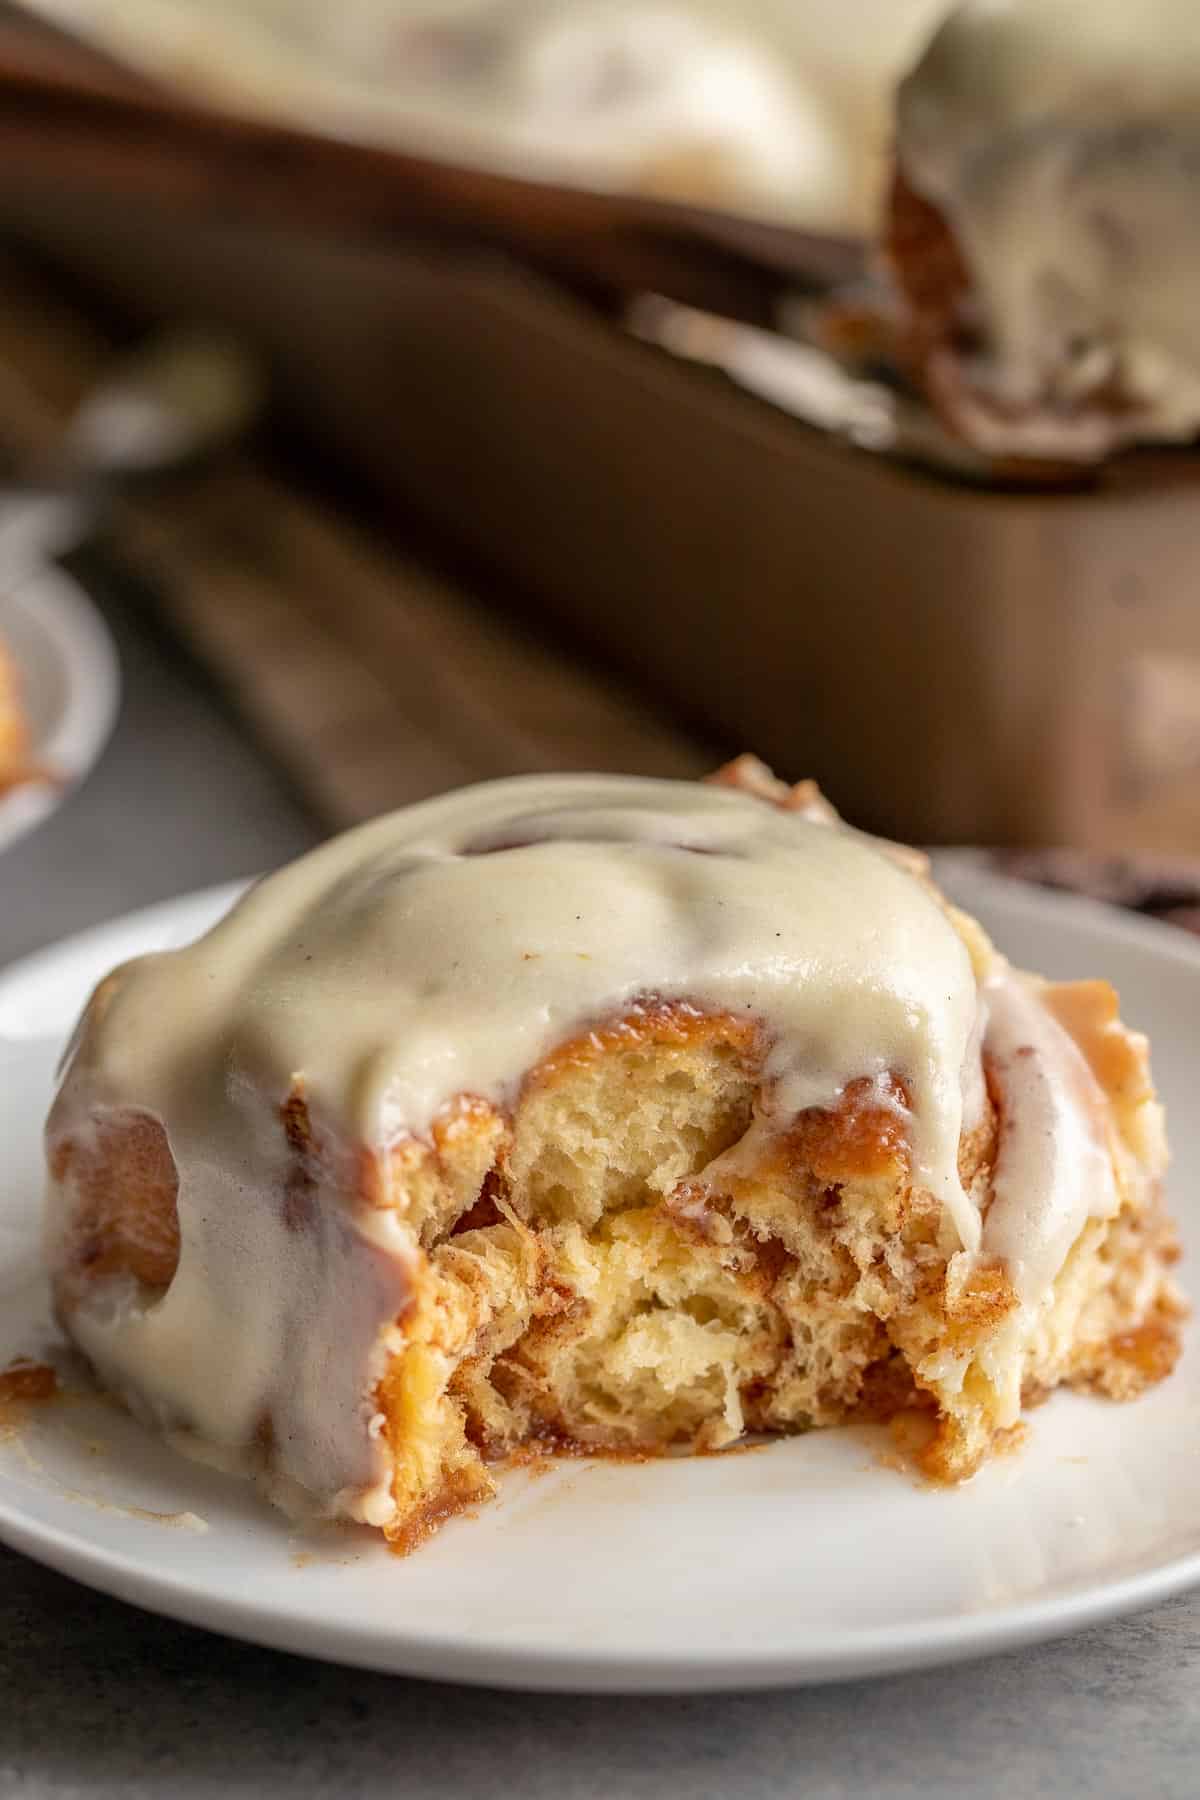 The best cinnamon rolls are soft, fluffy with plenty of the cinnamon sugar ribboned throughout and a heaping amount of cream cheese icing on top. It's a close up image of the cinnamon roll to show all of those.